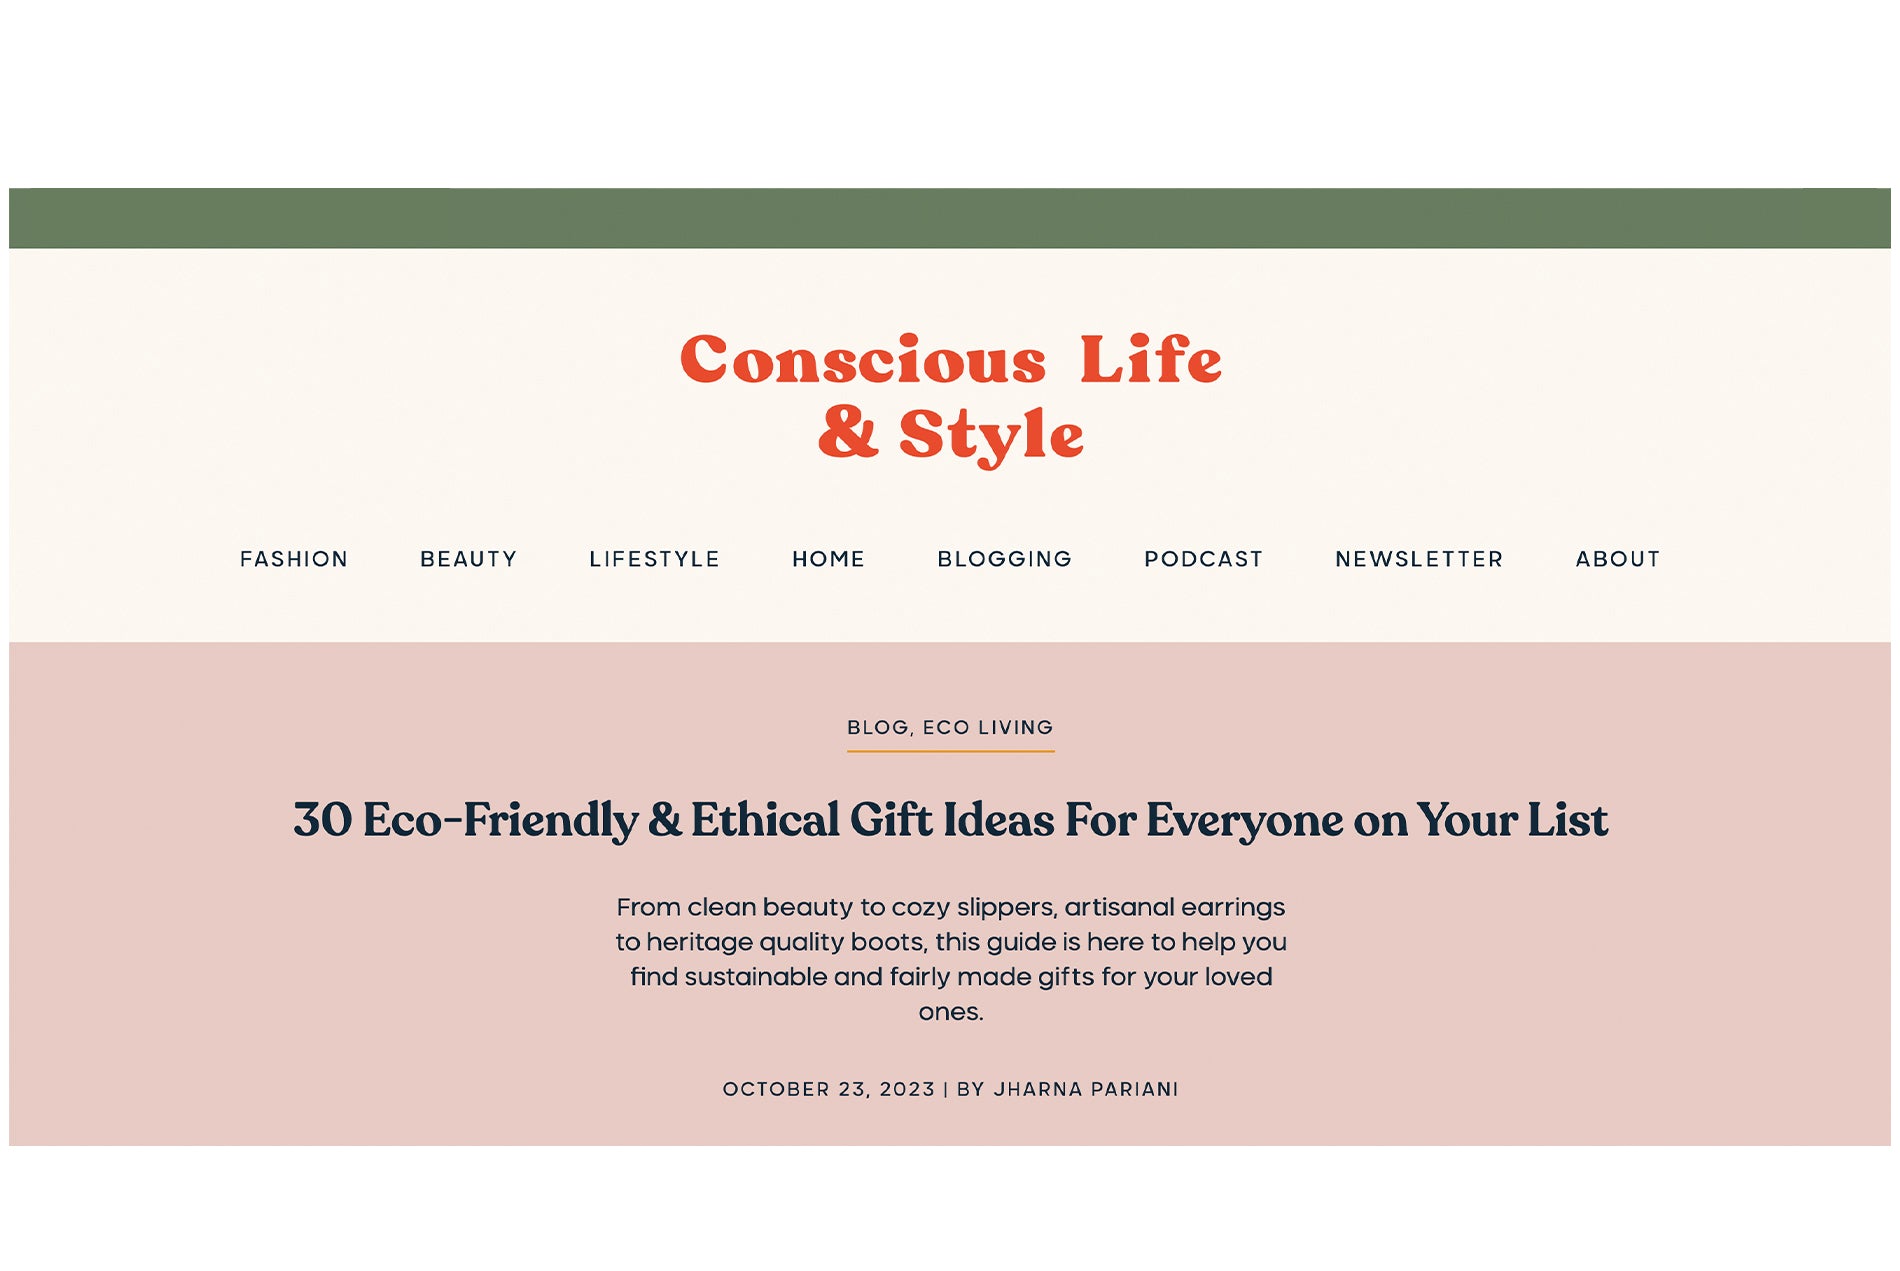 For Everyone on your List! A Eco-Friendly & Ethical Gift Guide